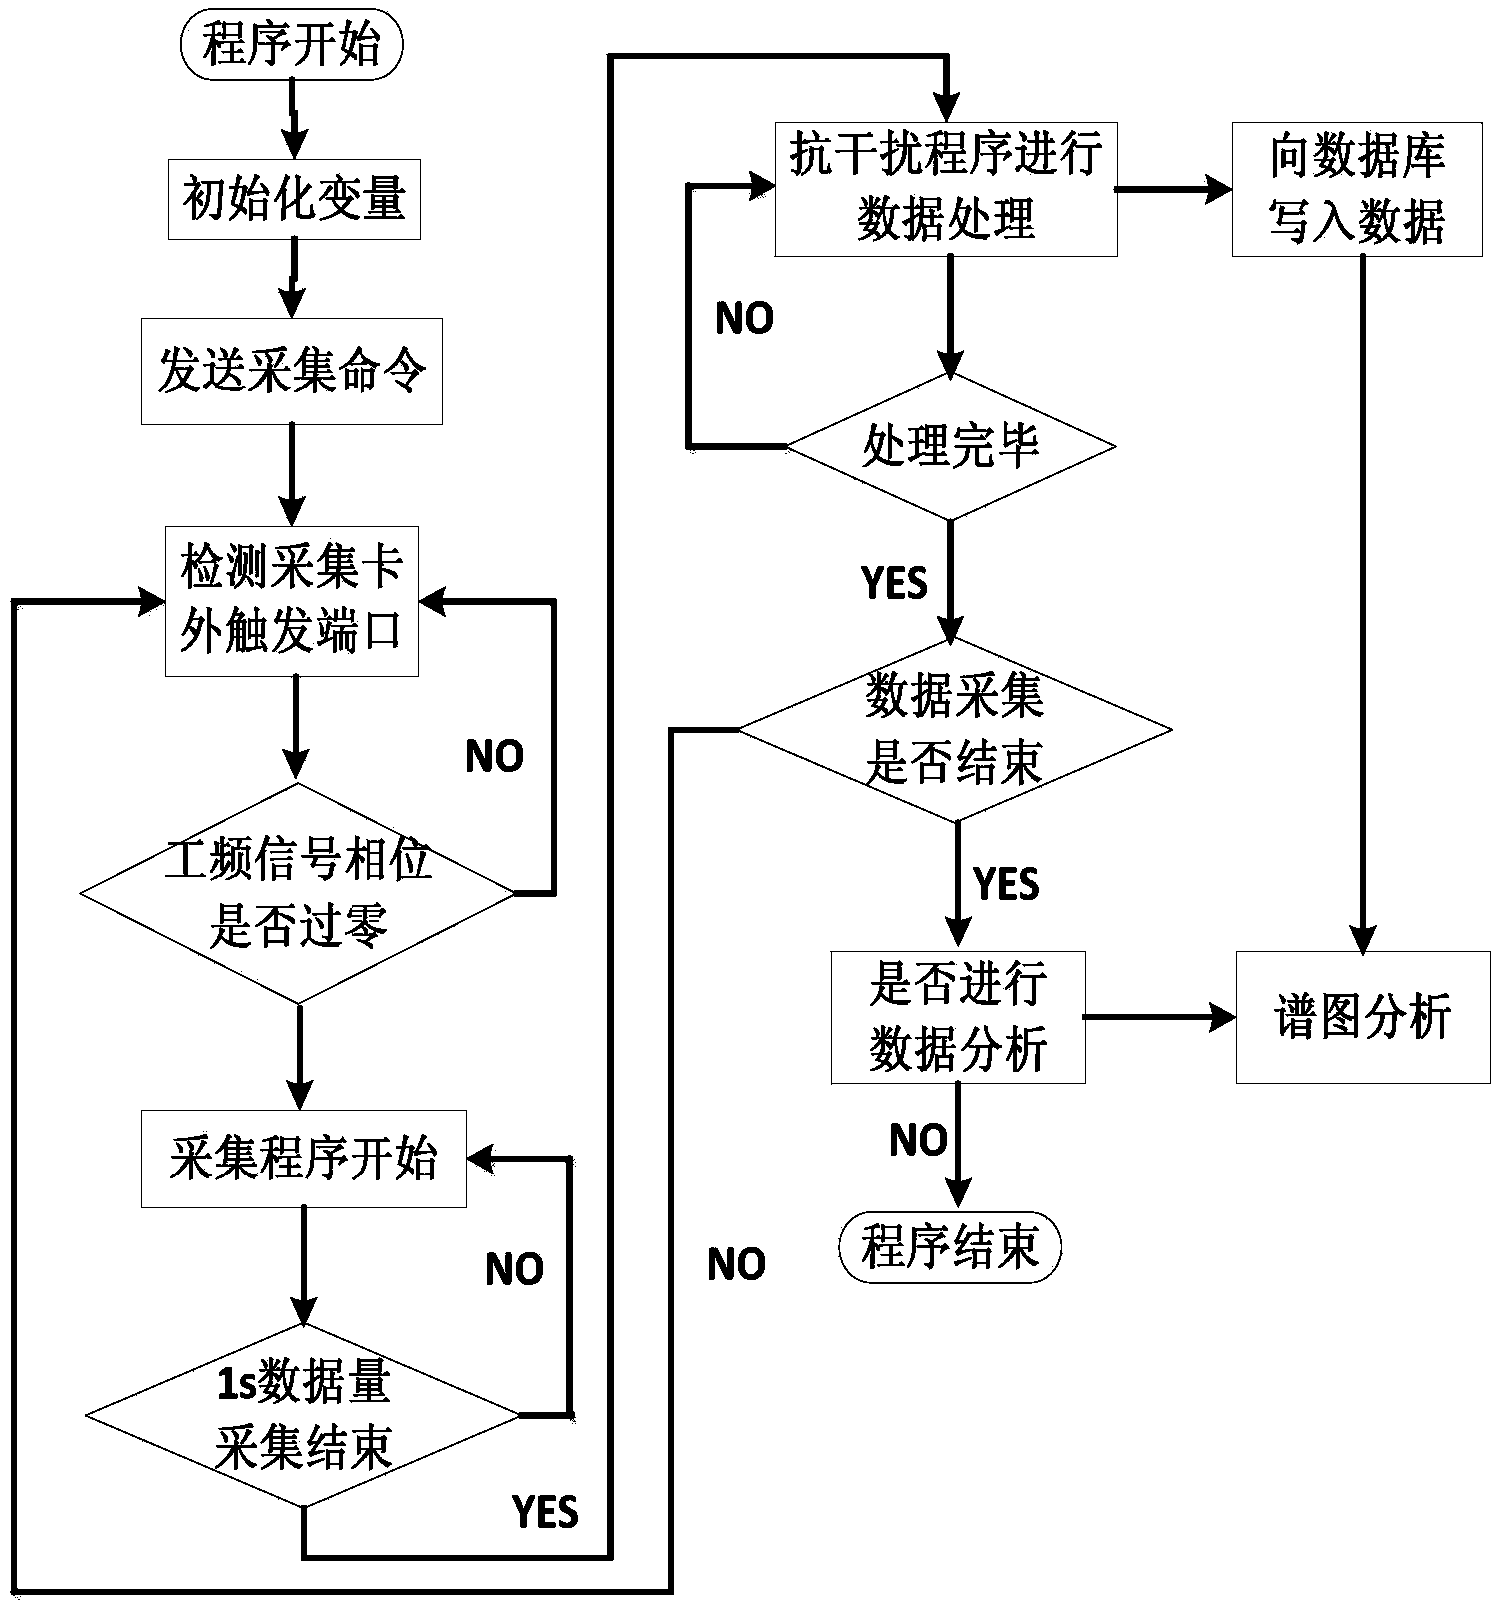 Partial discharge measuring device and method of electrical tree growth process in crosslinked polyethylene (XLPE) cable insulation